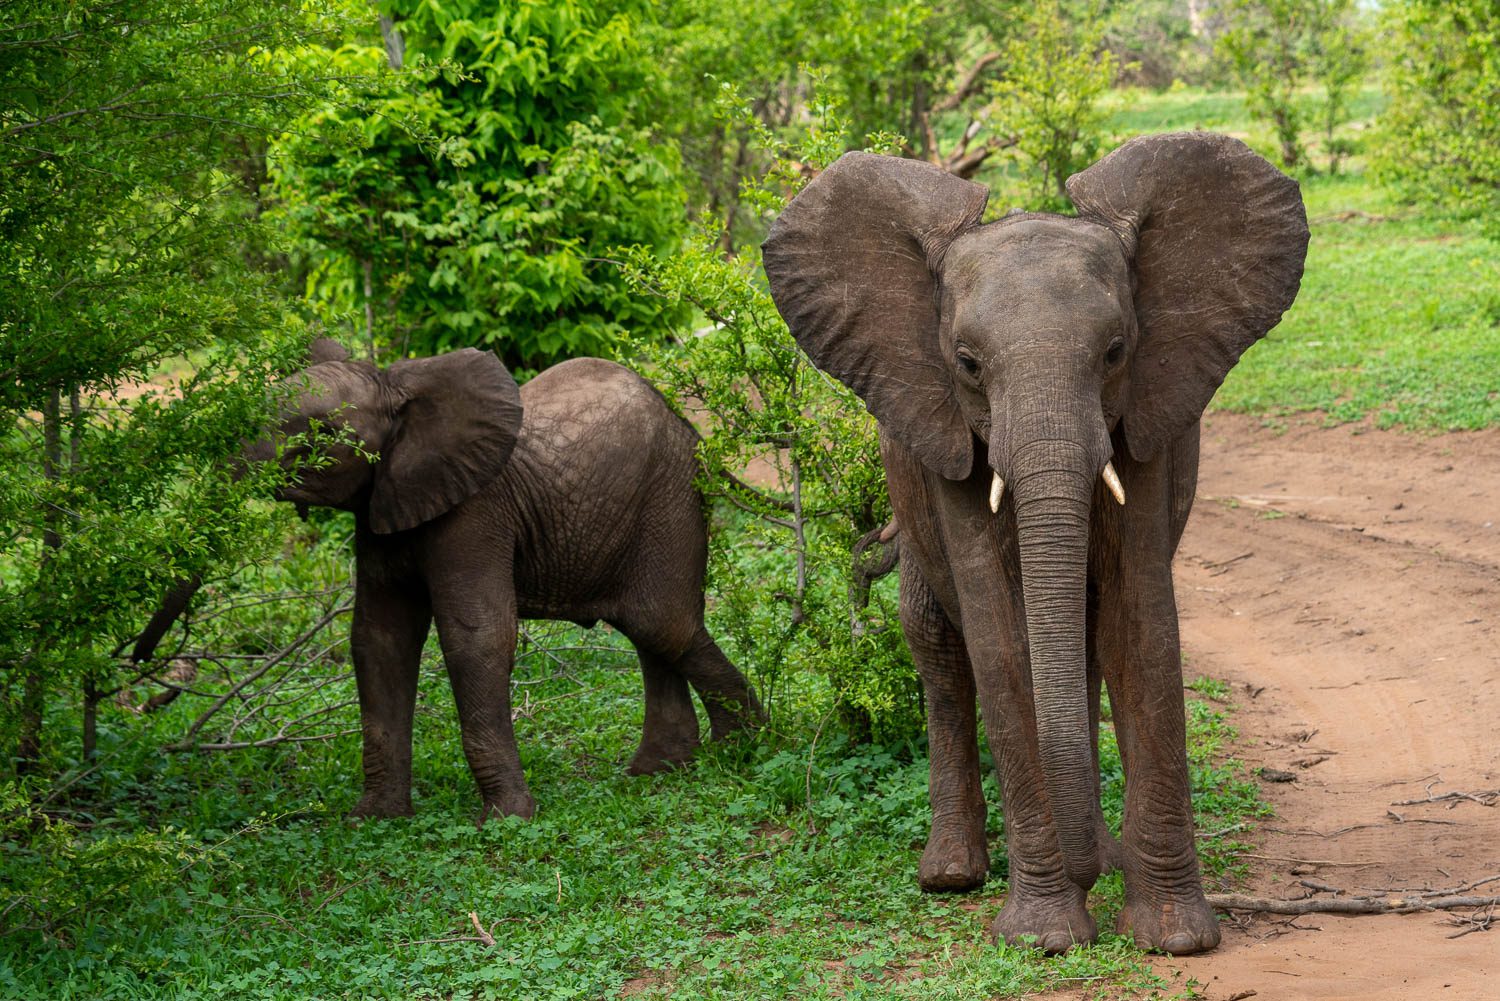 Two elephants are standing amidst green foliage; one facing the camera with ears spread wide and another facing away on a dirt path.